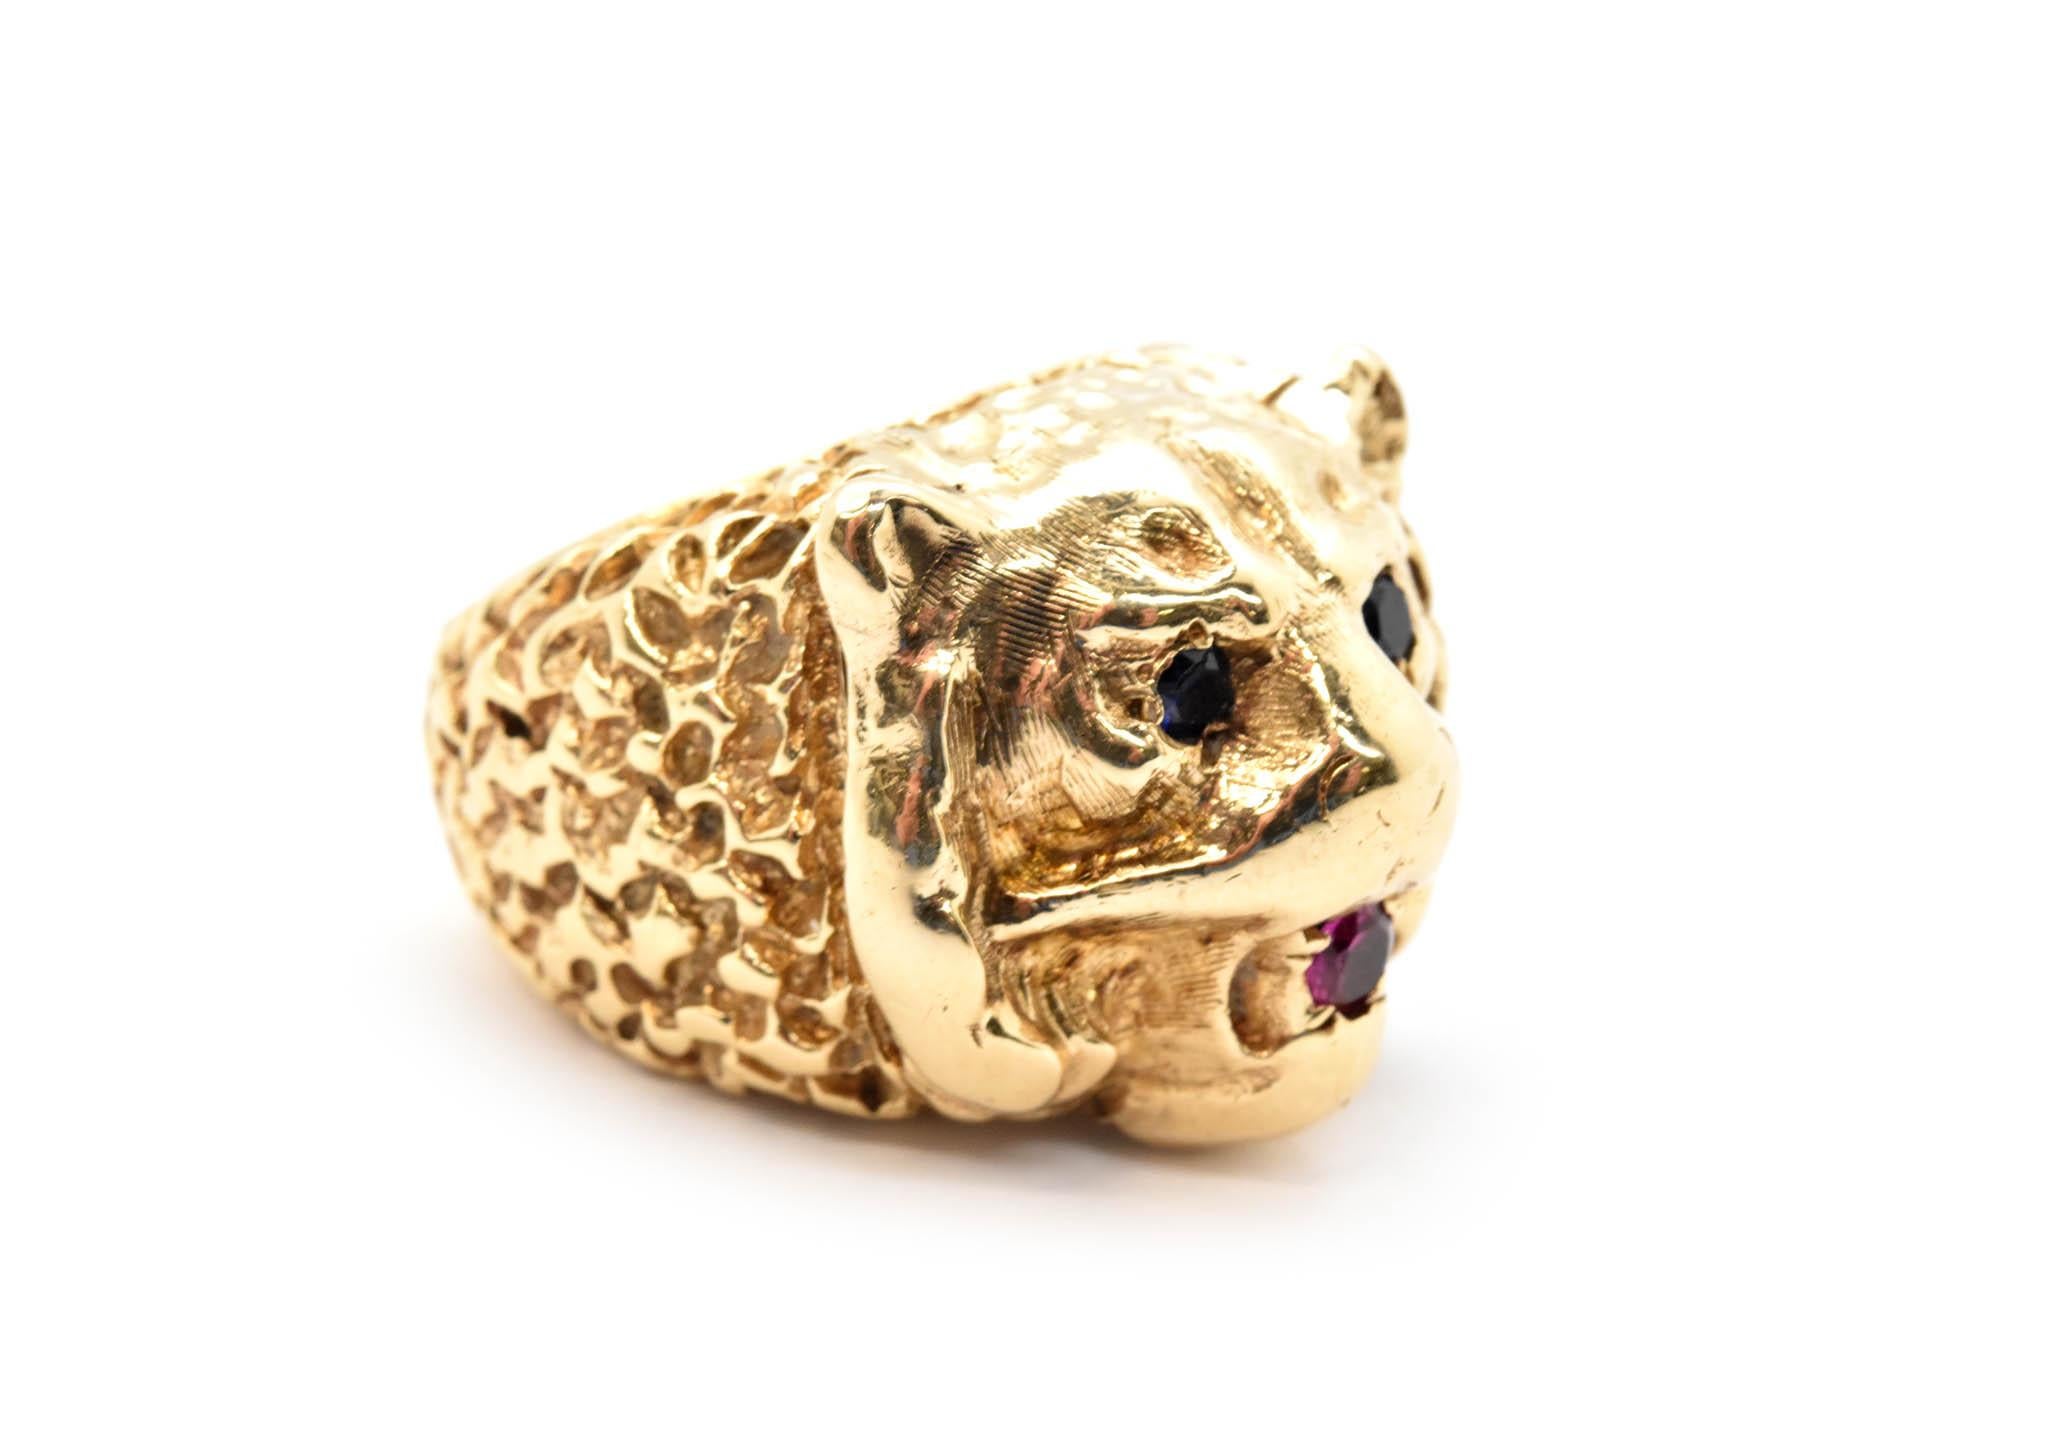 This ring is made in solid 14k yellow gold. The ring is in the shape of a bear head with sapphire eyes and a ruby in its mouth. The ring measures 19mm wide, and it weighs 31.53 grams. The ring is a size 5.